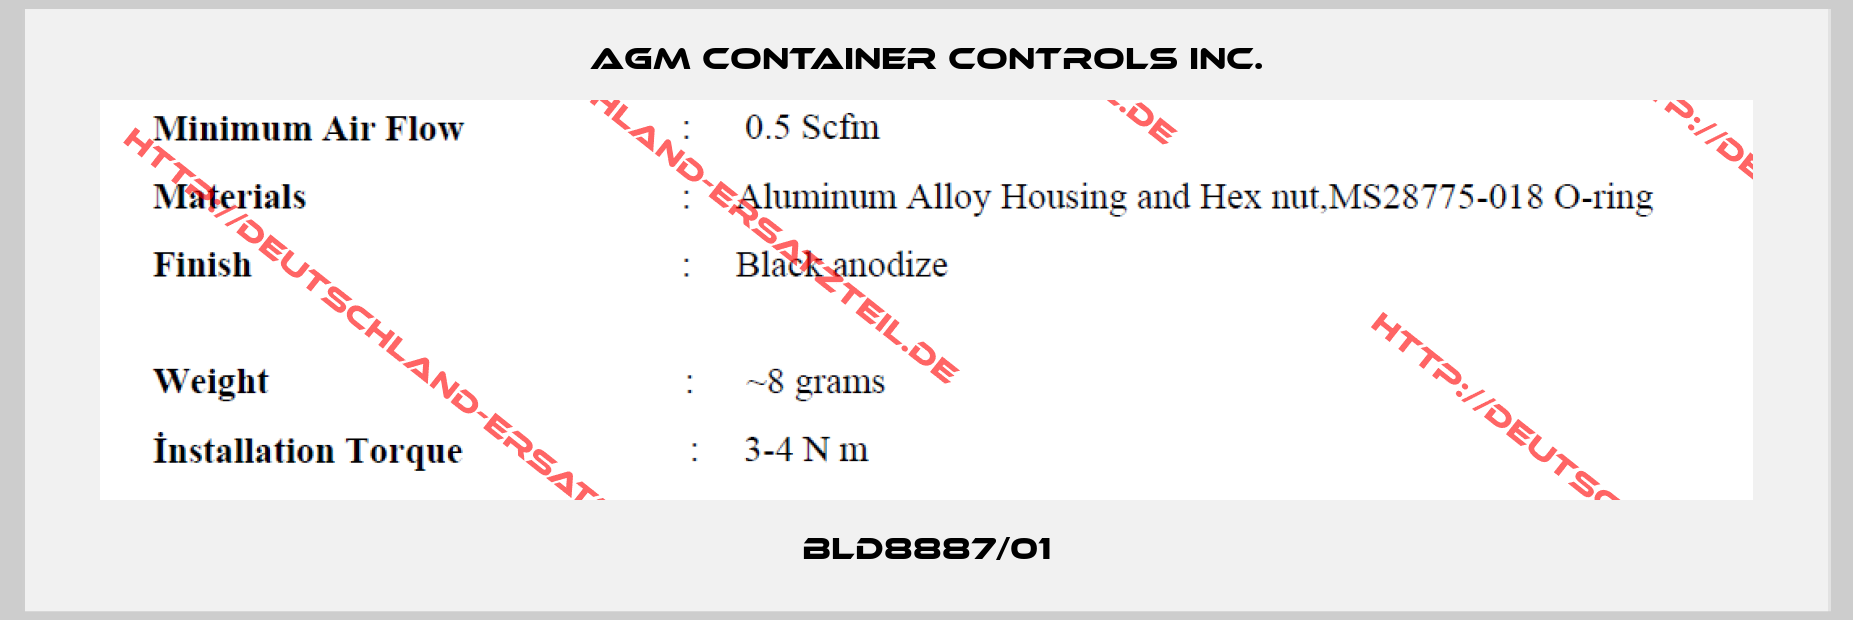 AGM CONTAINER CONTROLS INC.-BLD8887/01